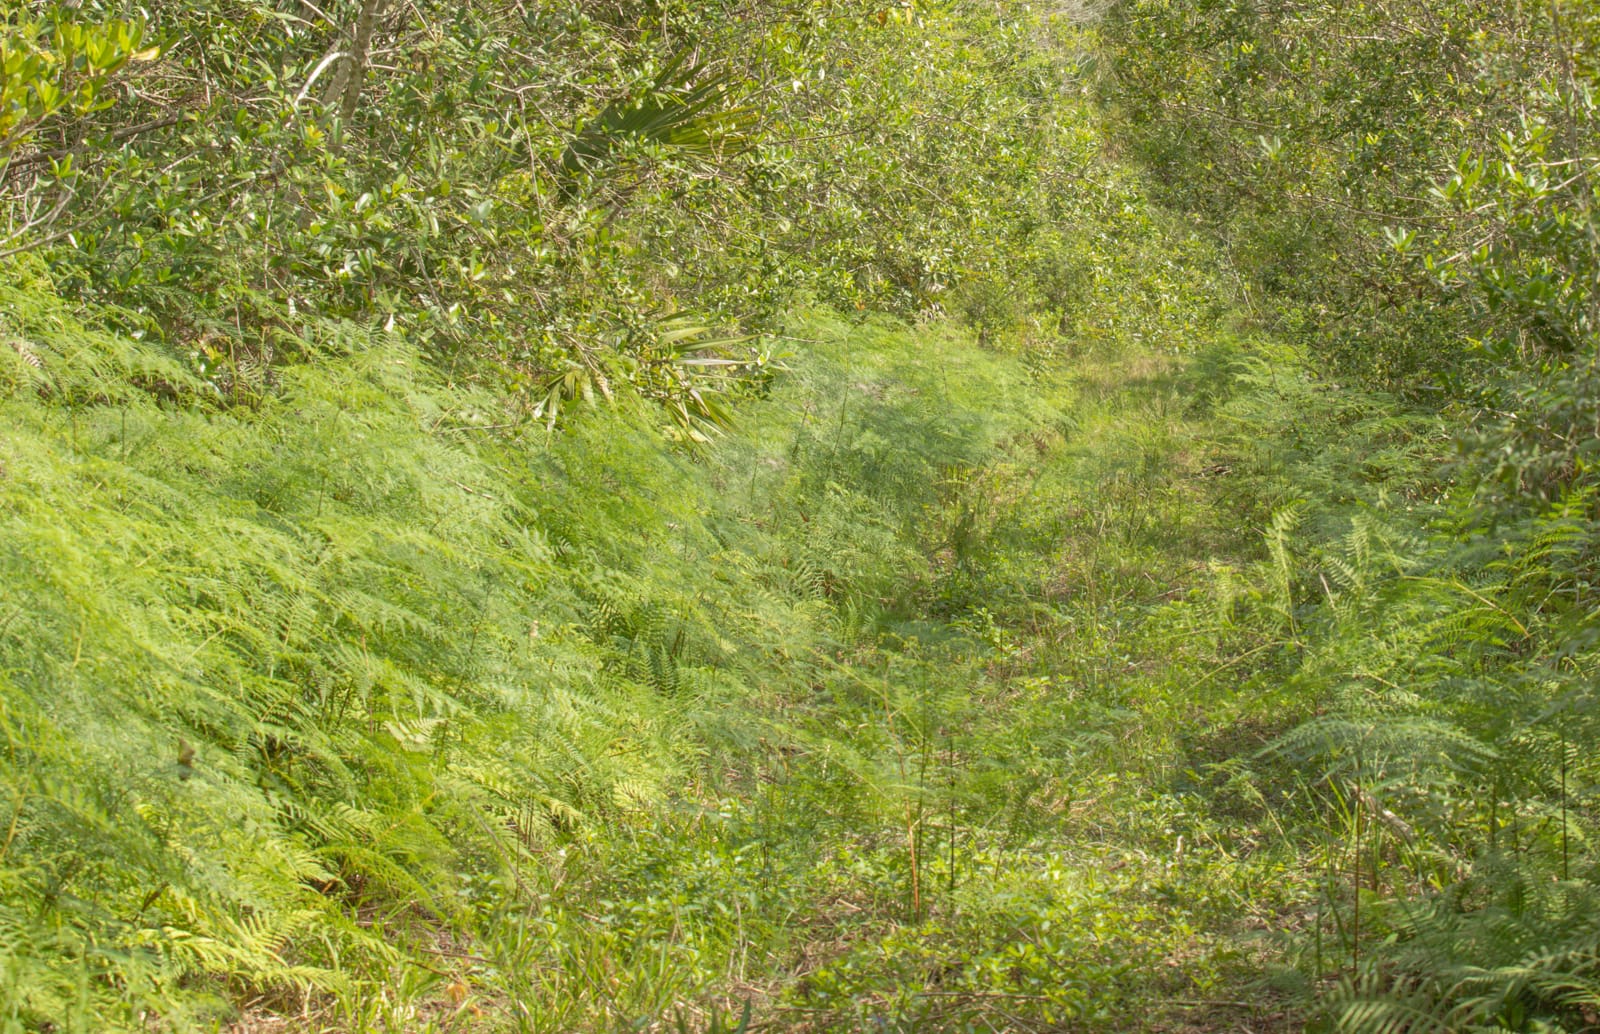 Ferns, trees, and shrubs densely packed together in the Florida Everglades